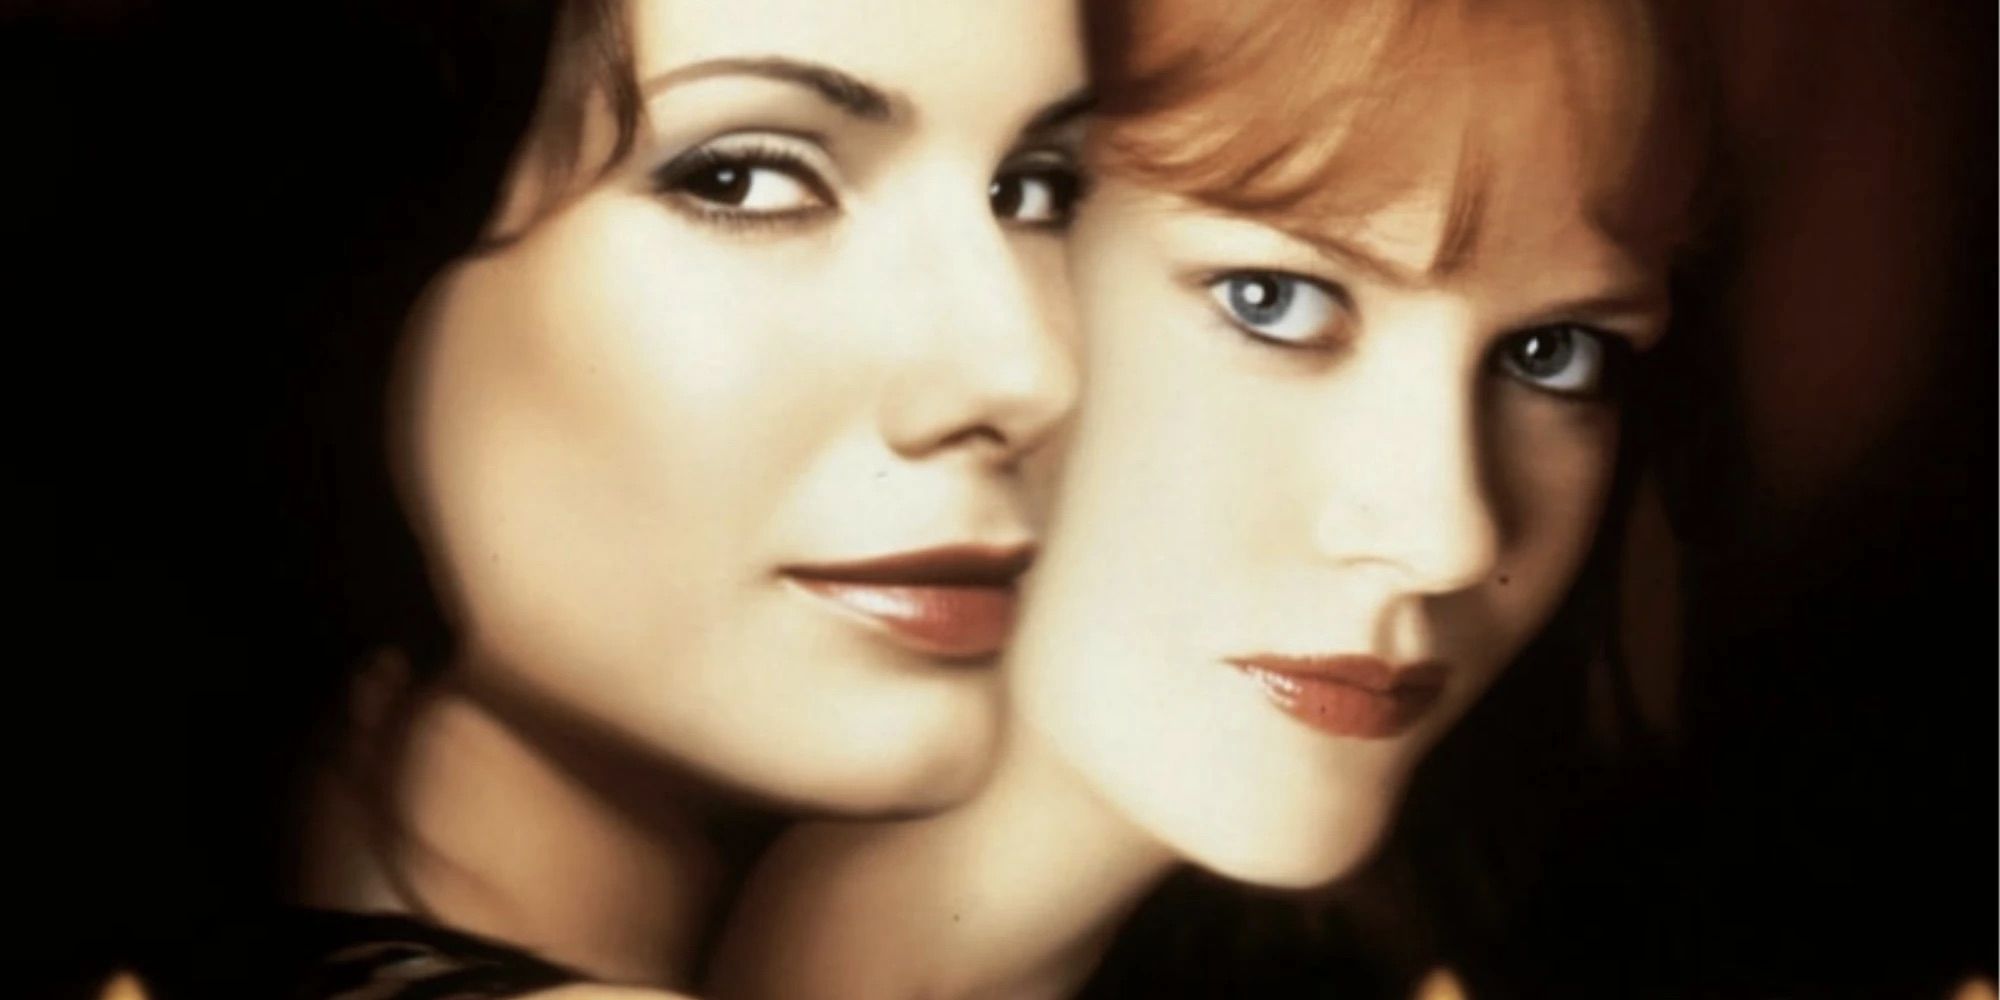 Sandra Bullock and Nicole Kidman in the poster for Practical Magic